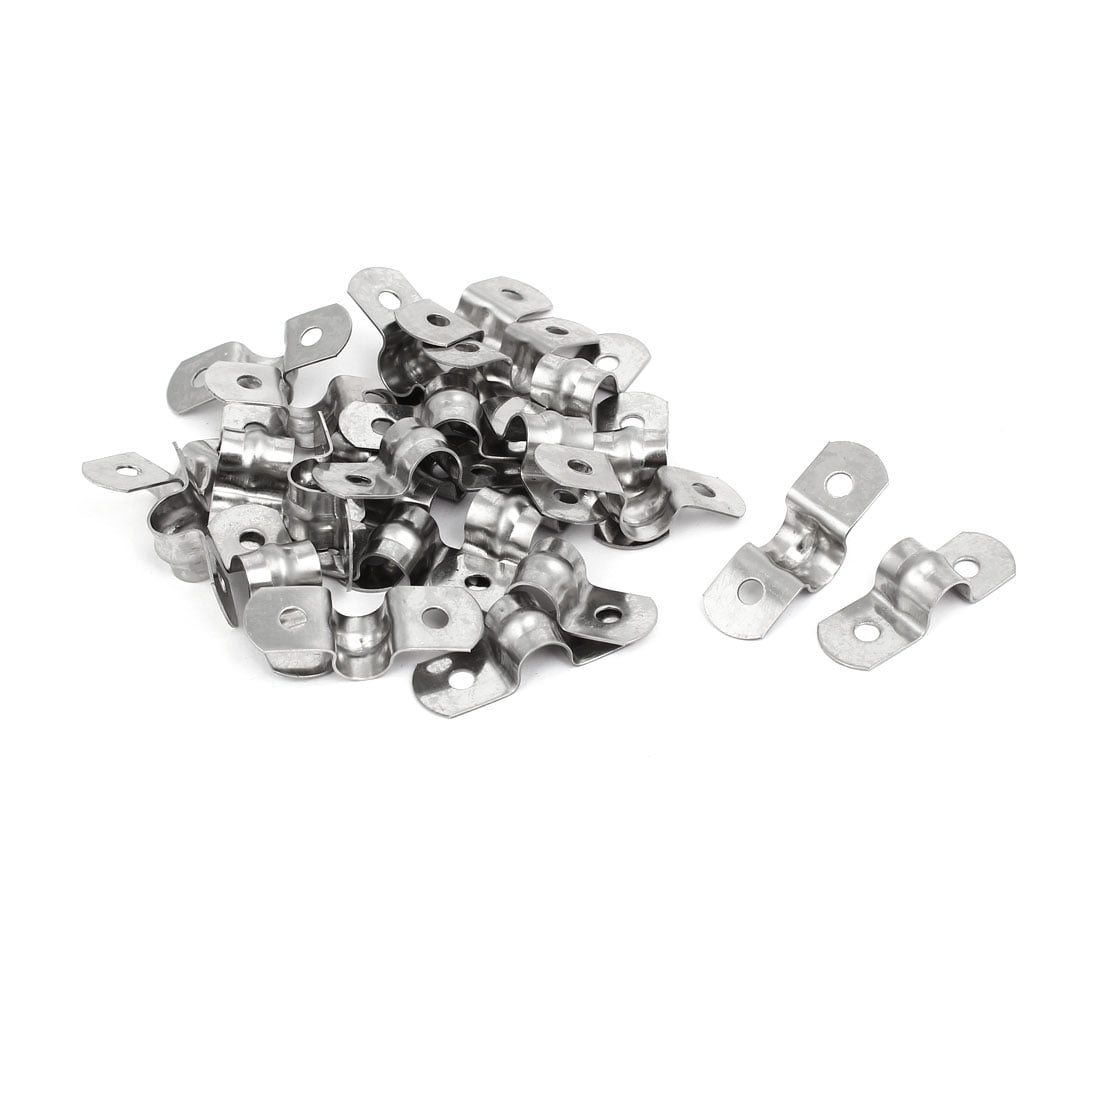 uxcell M10 201 Stainless Steel Two Hole Pipe Straps Tension Tube Clip Clamp 25pcs